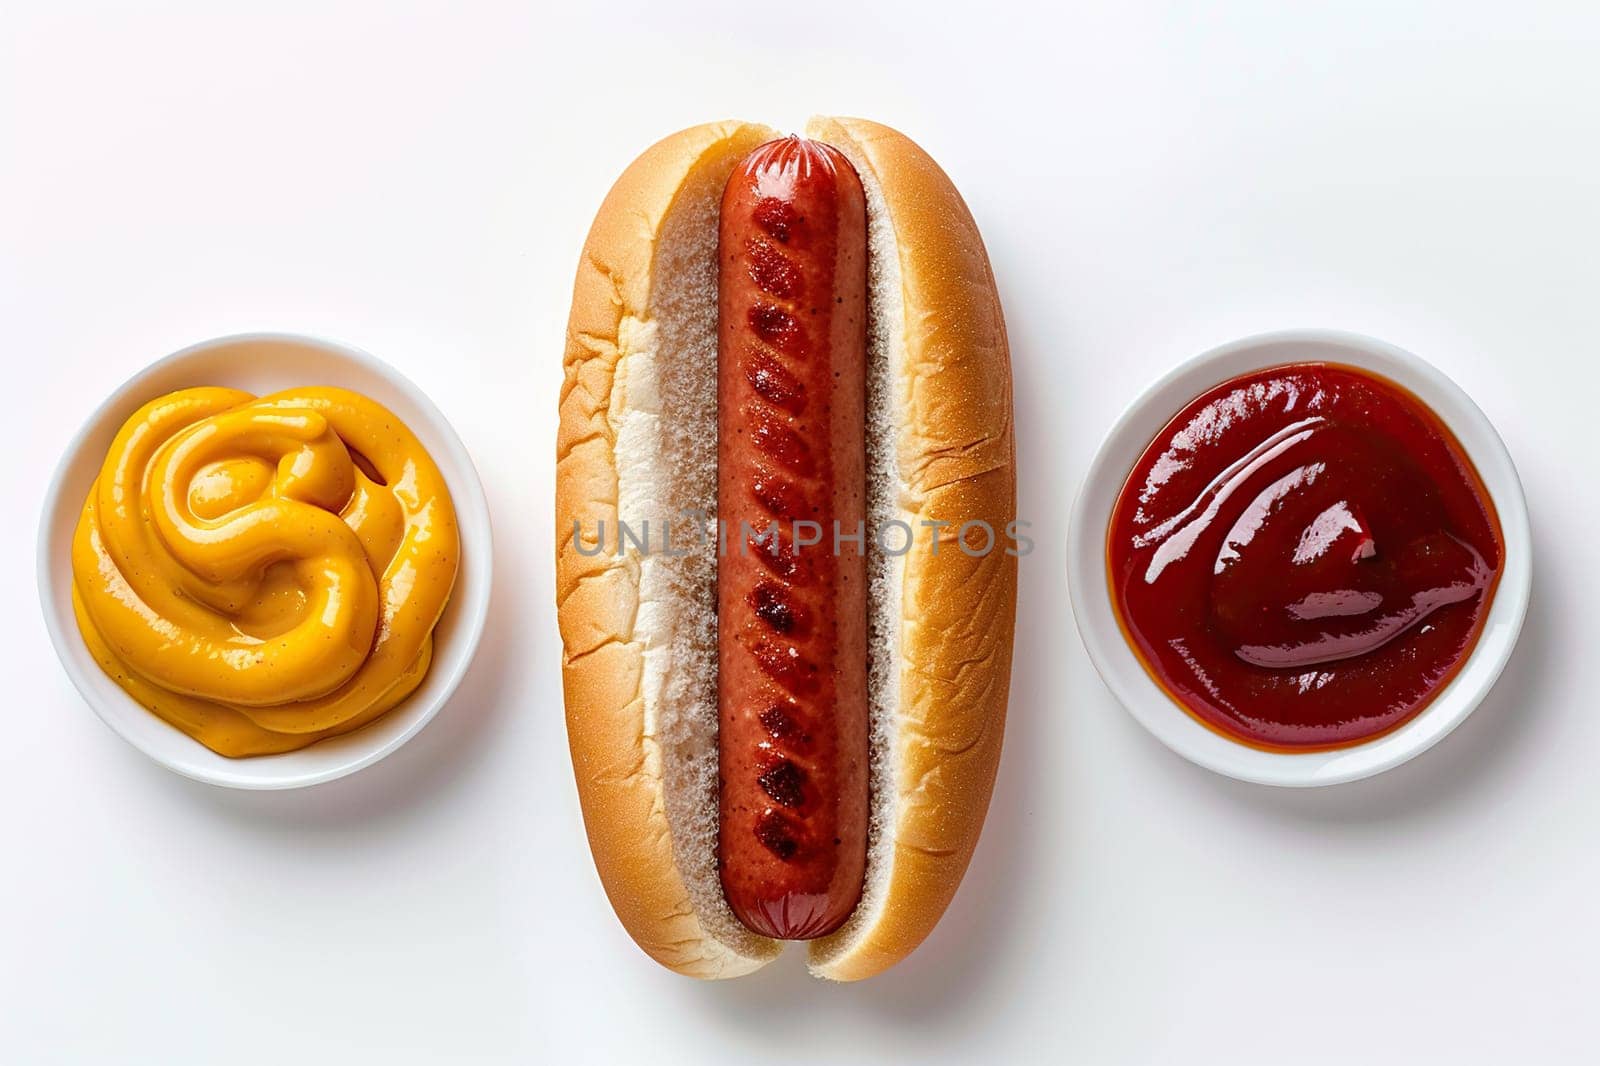 Ingredients for a hot dog. Bun, sausage, mustard and ketchup on a white background. Fast food concept.